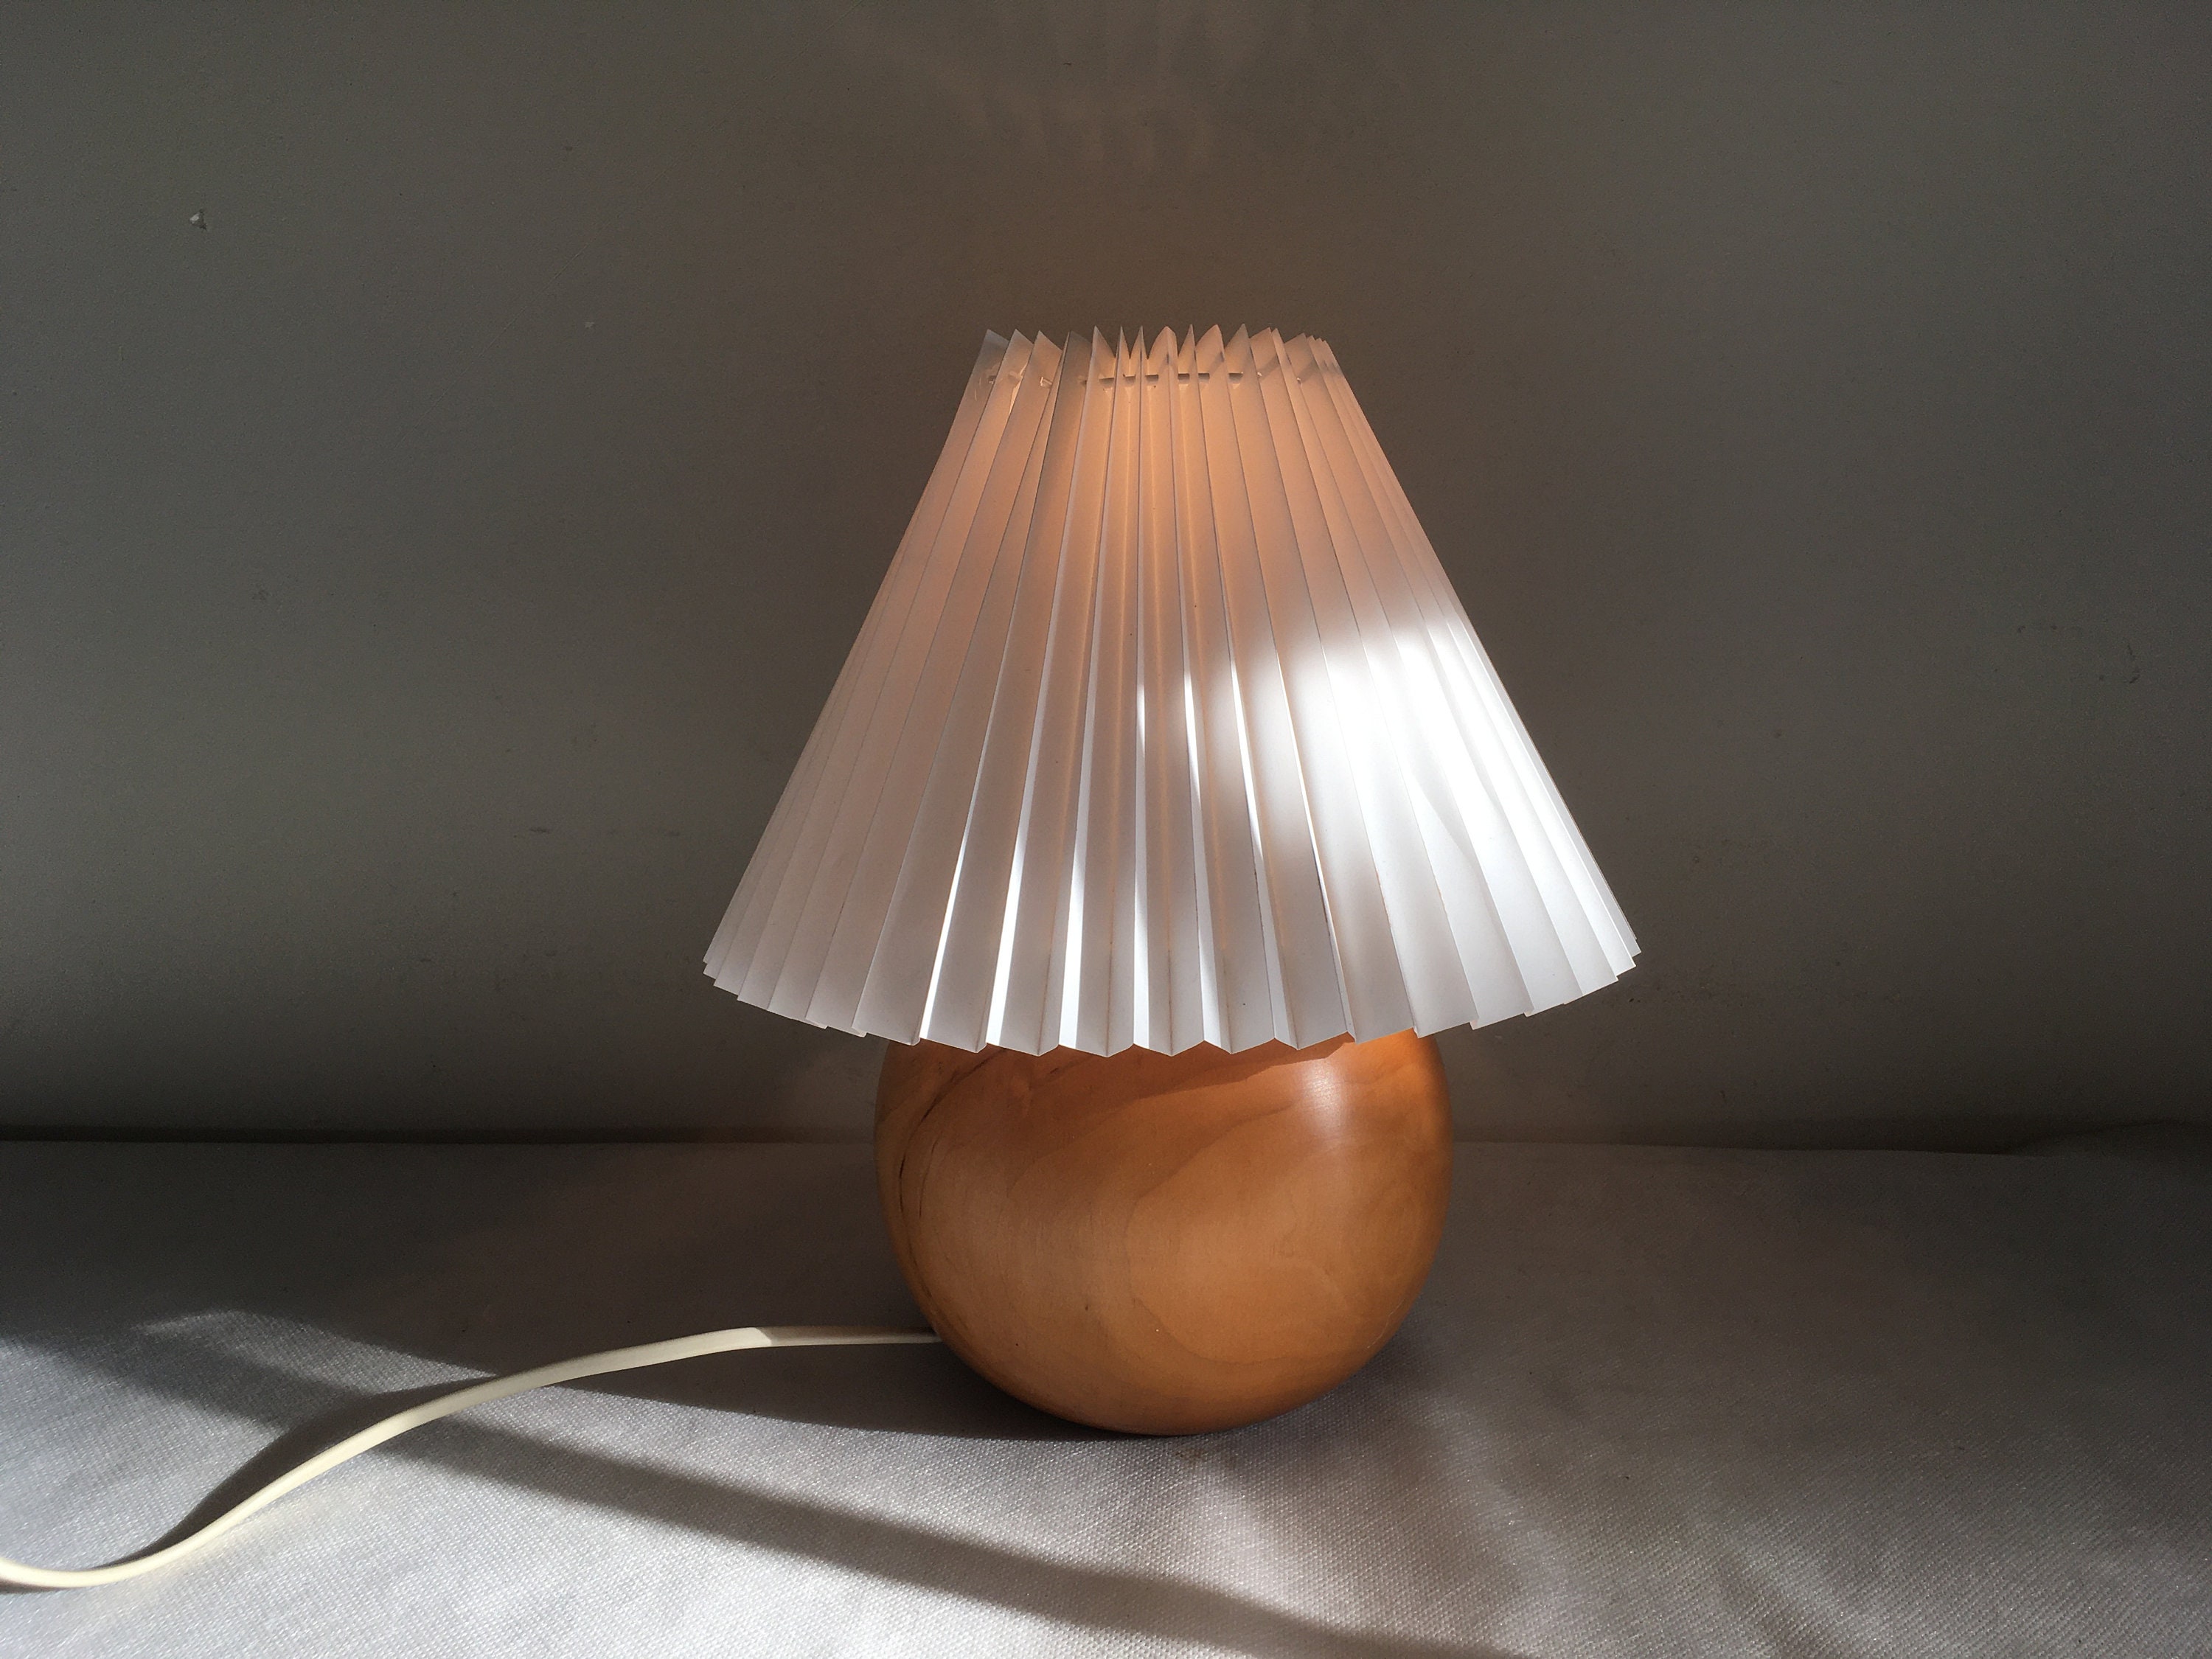 Vintage retro round wooden table lamp from the